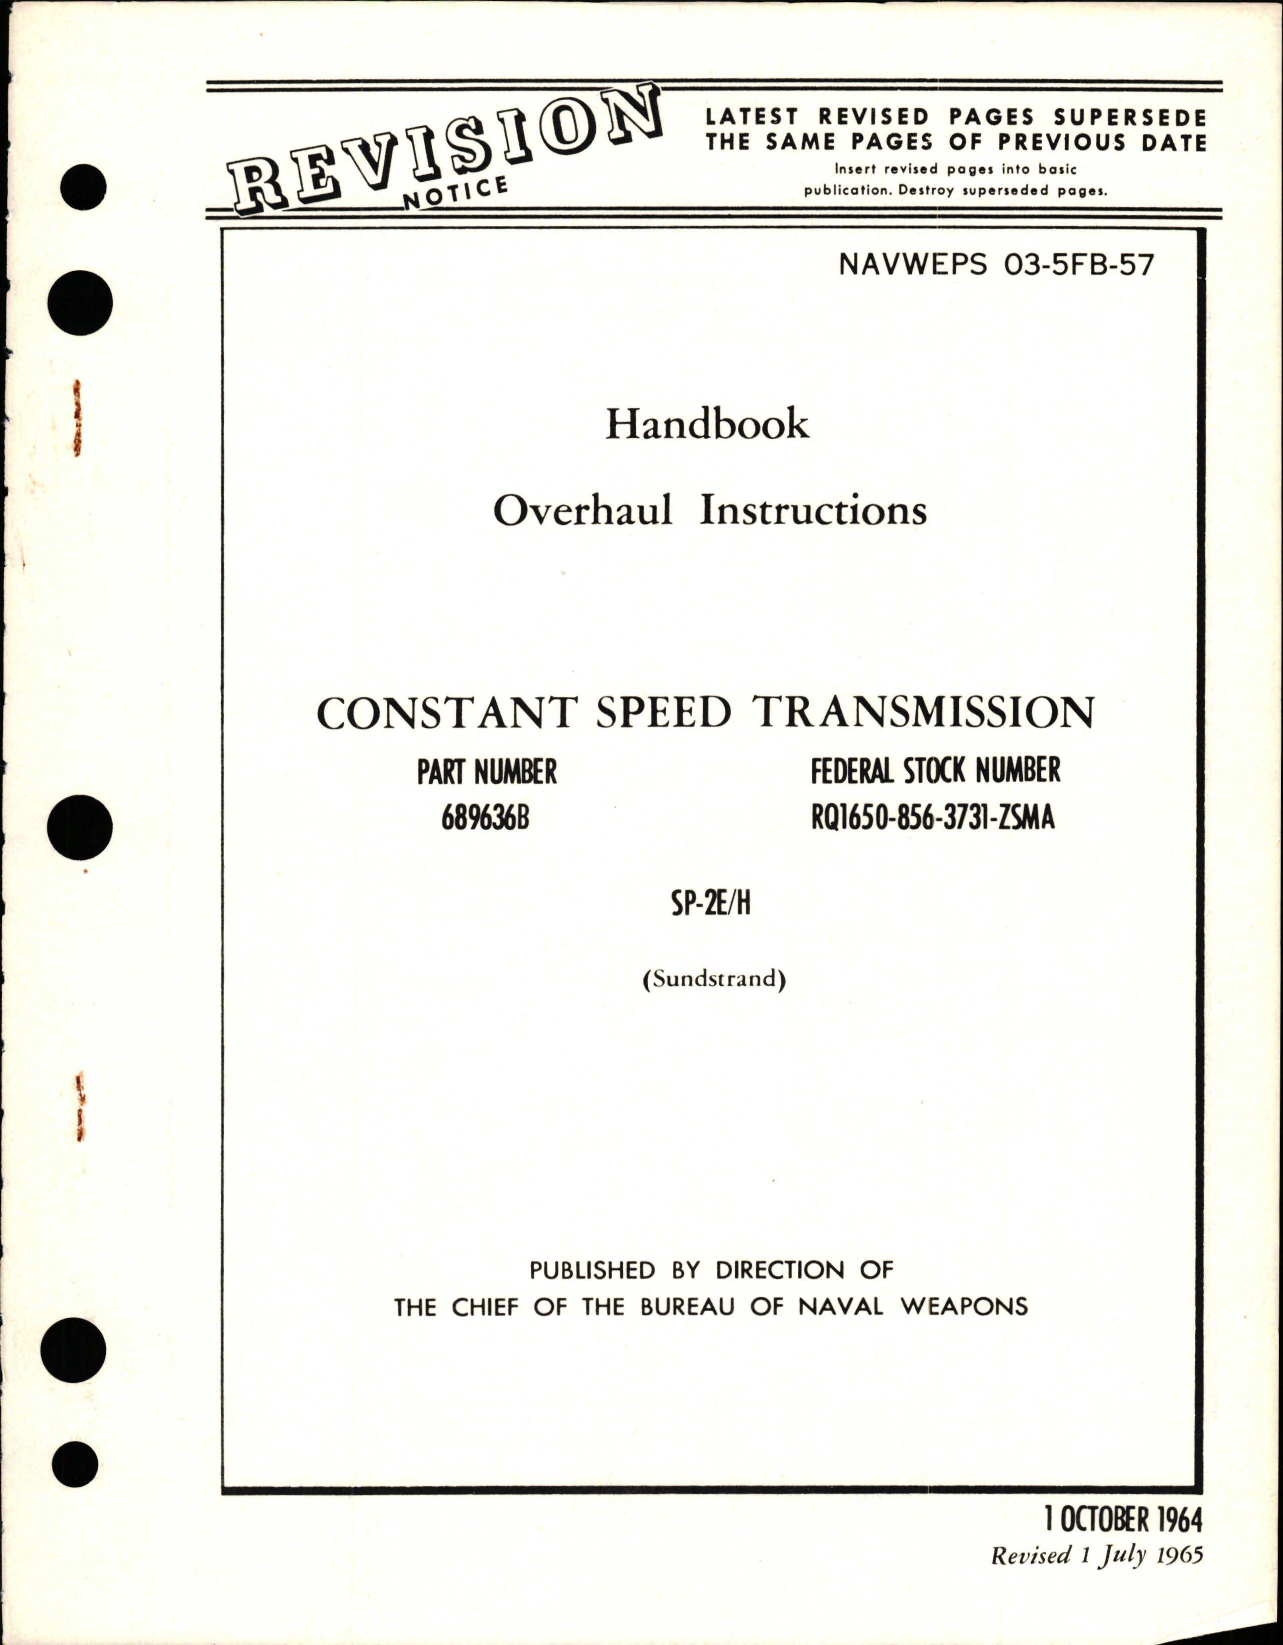 Sample page 1 from AirCorps Library document: Overhaul Instructions for Constant Speed Transmission - Part 689636B - SP-2E/H